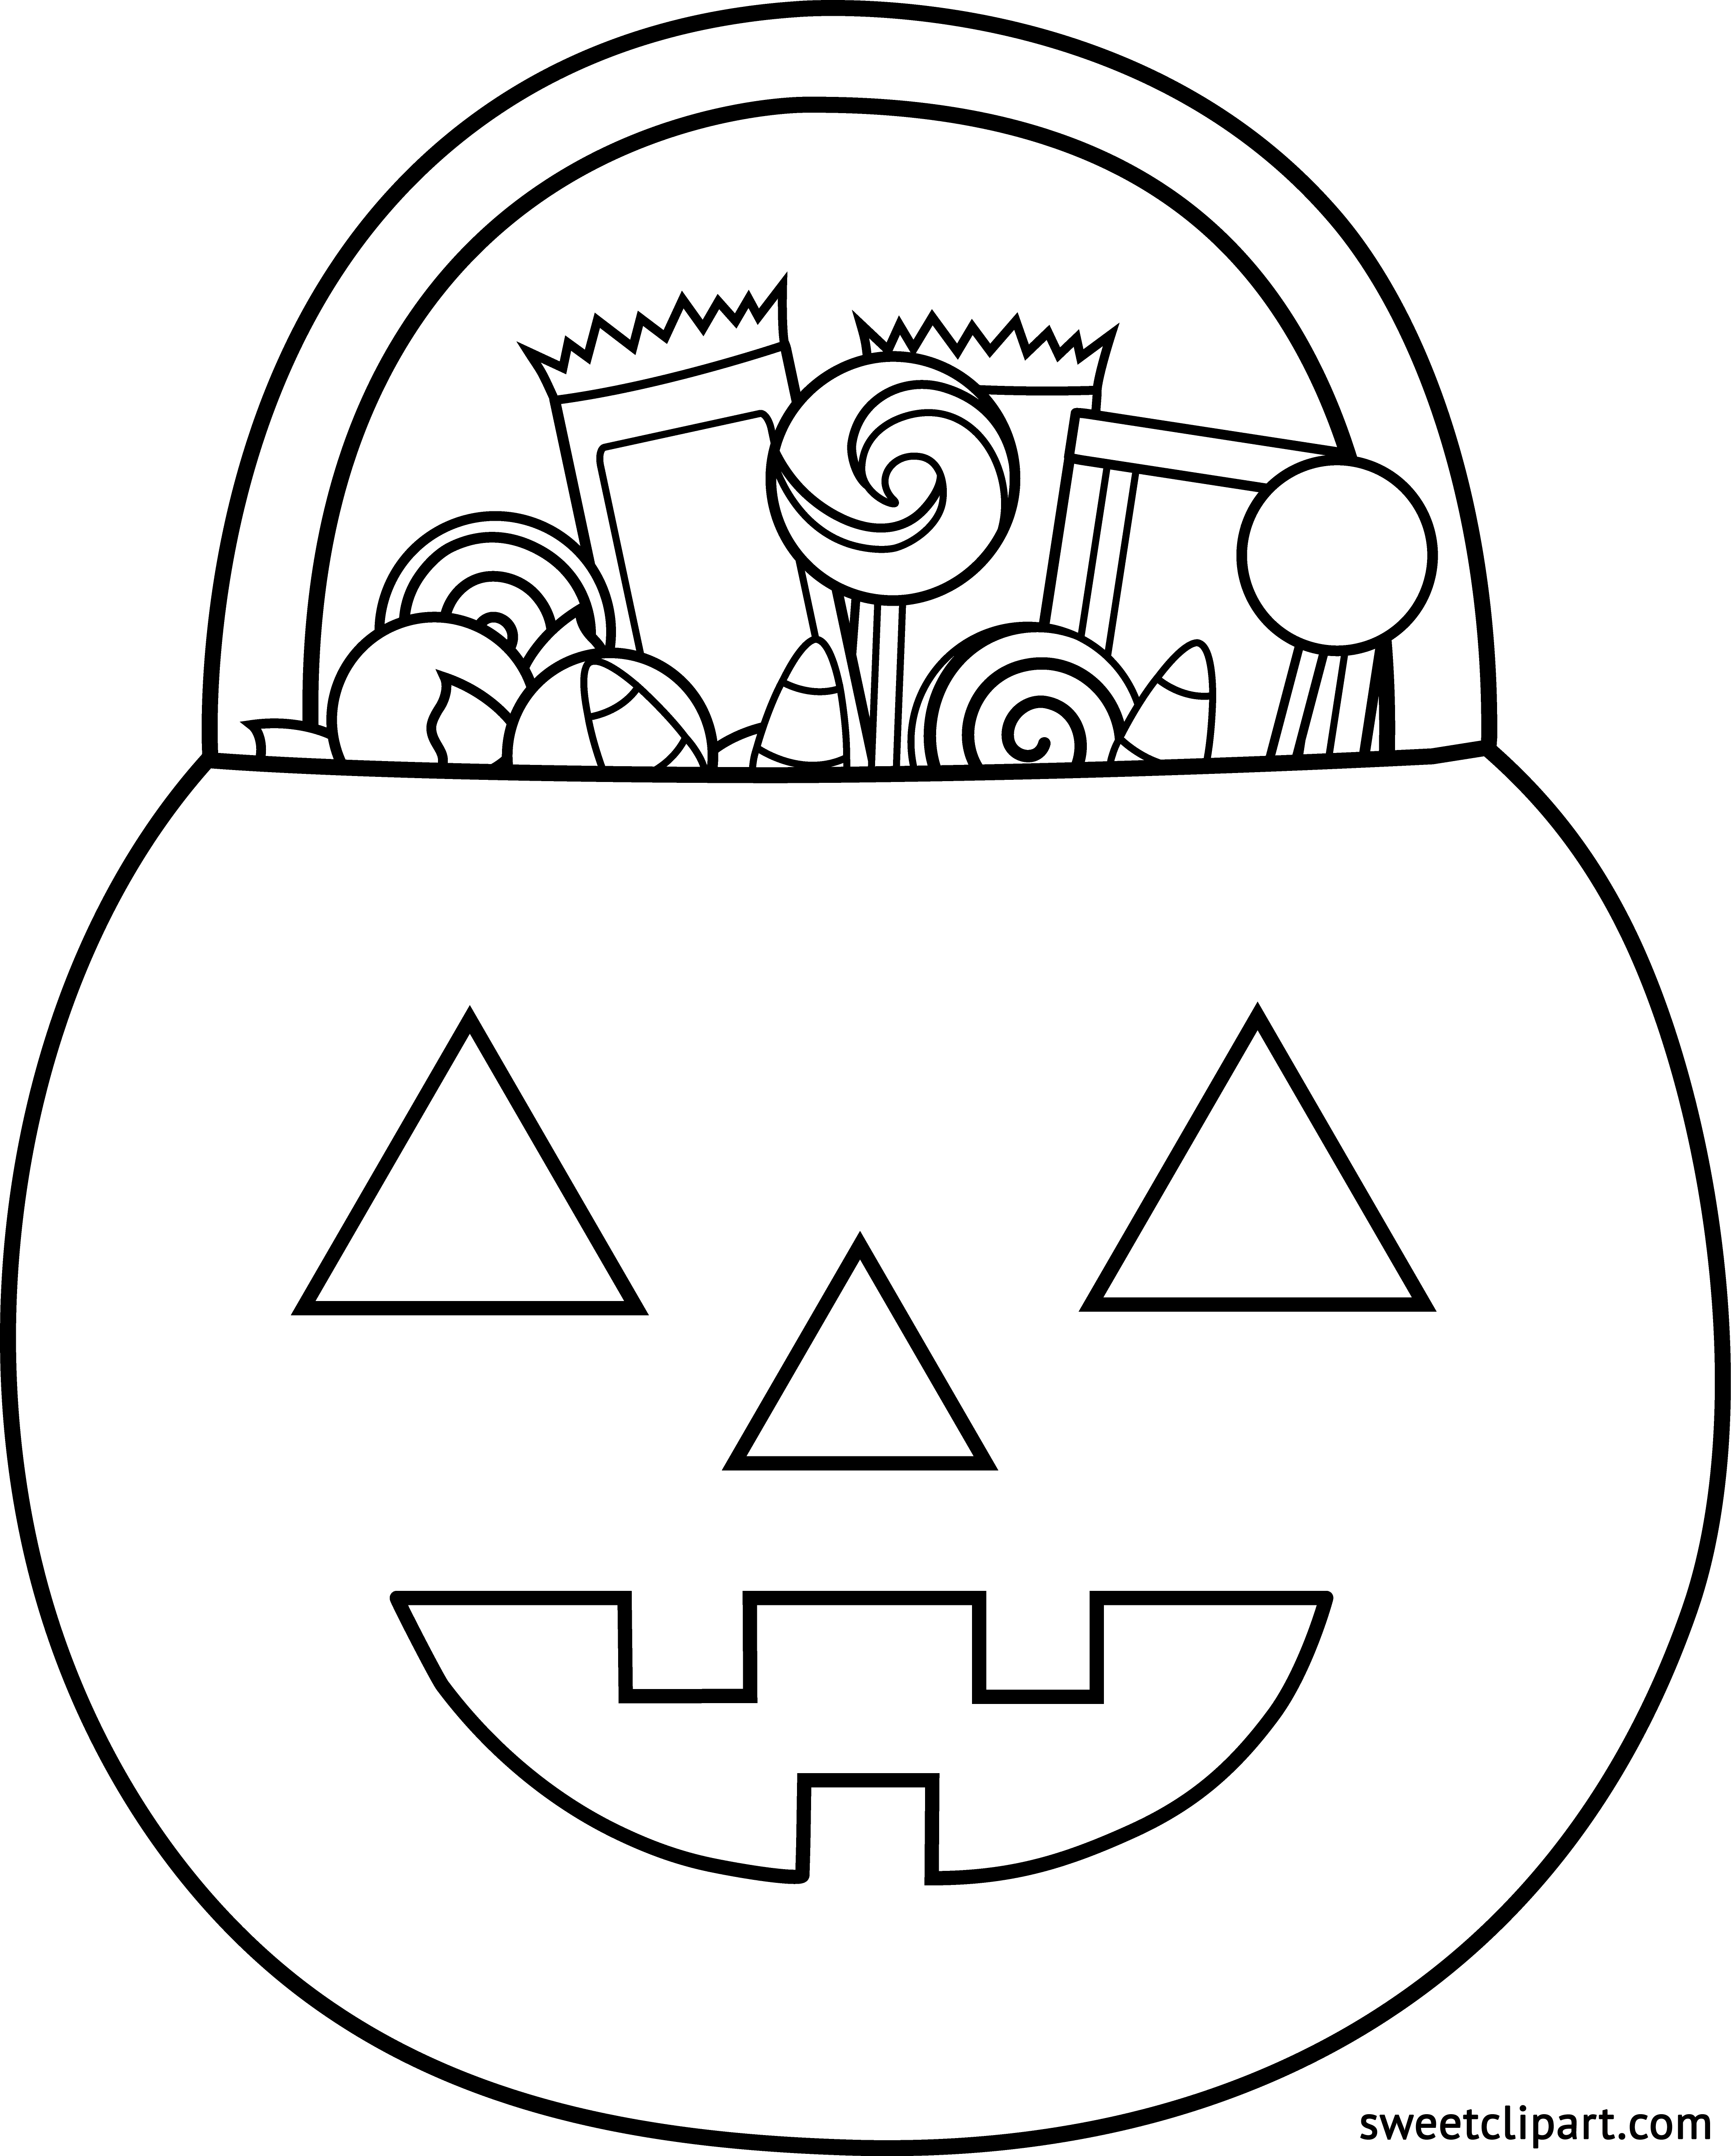 Halloween candy clipart black and white 5 » Clipart Station.